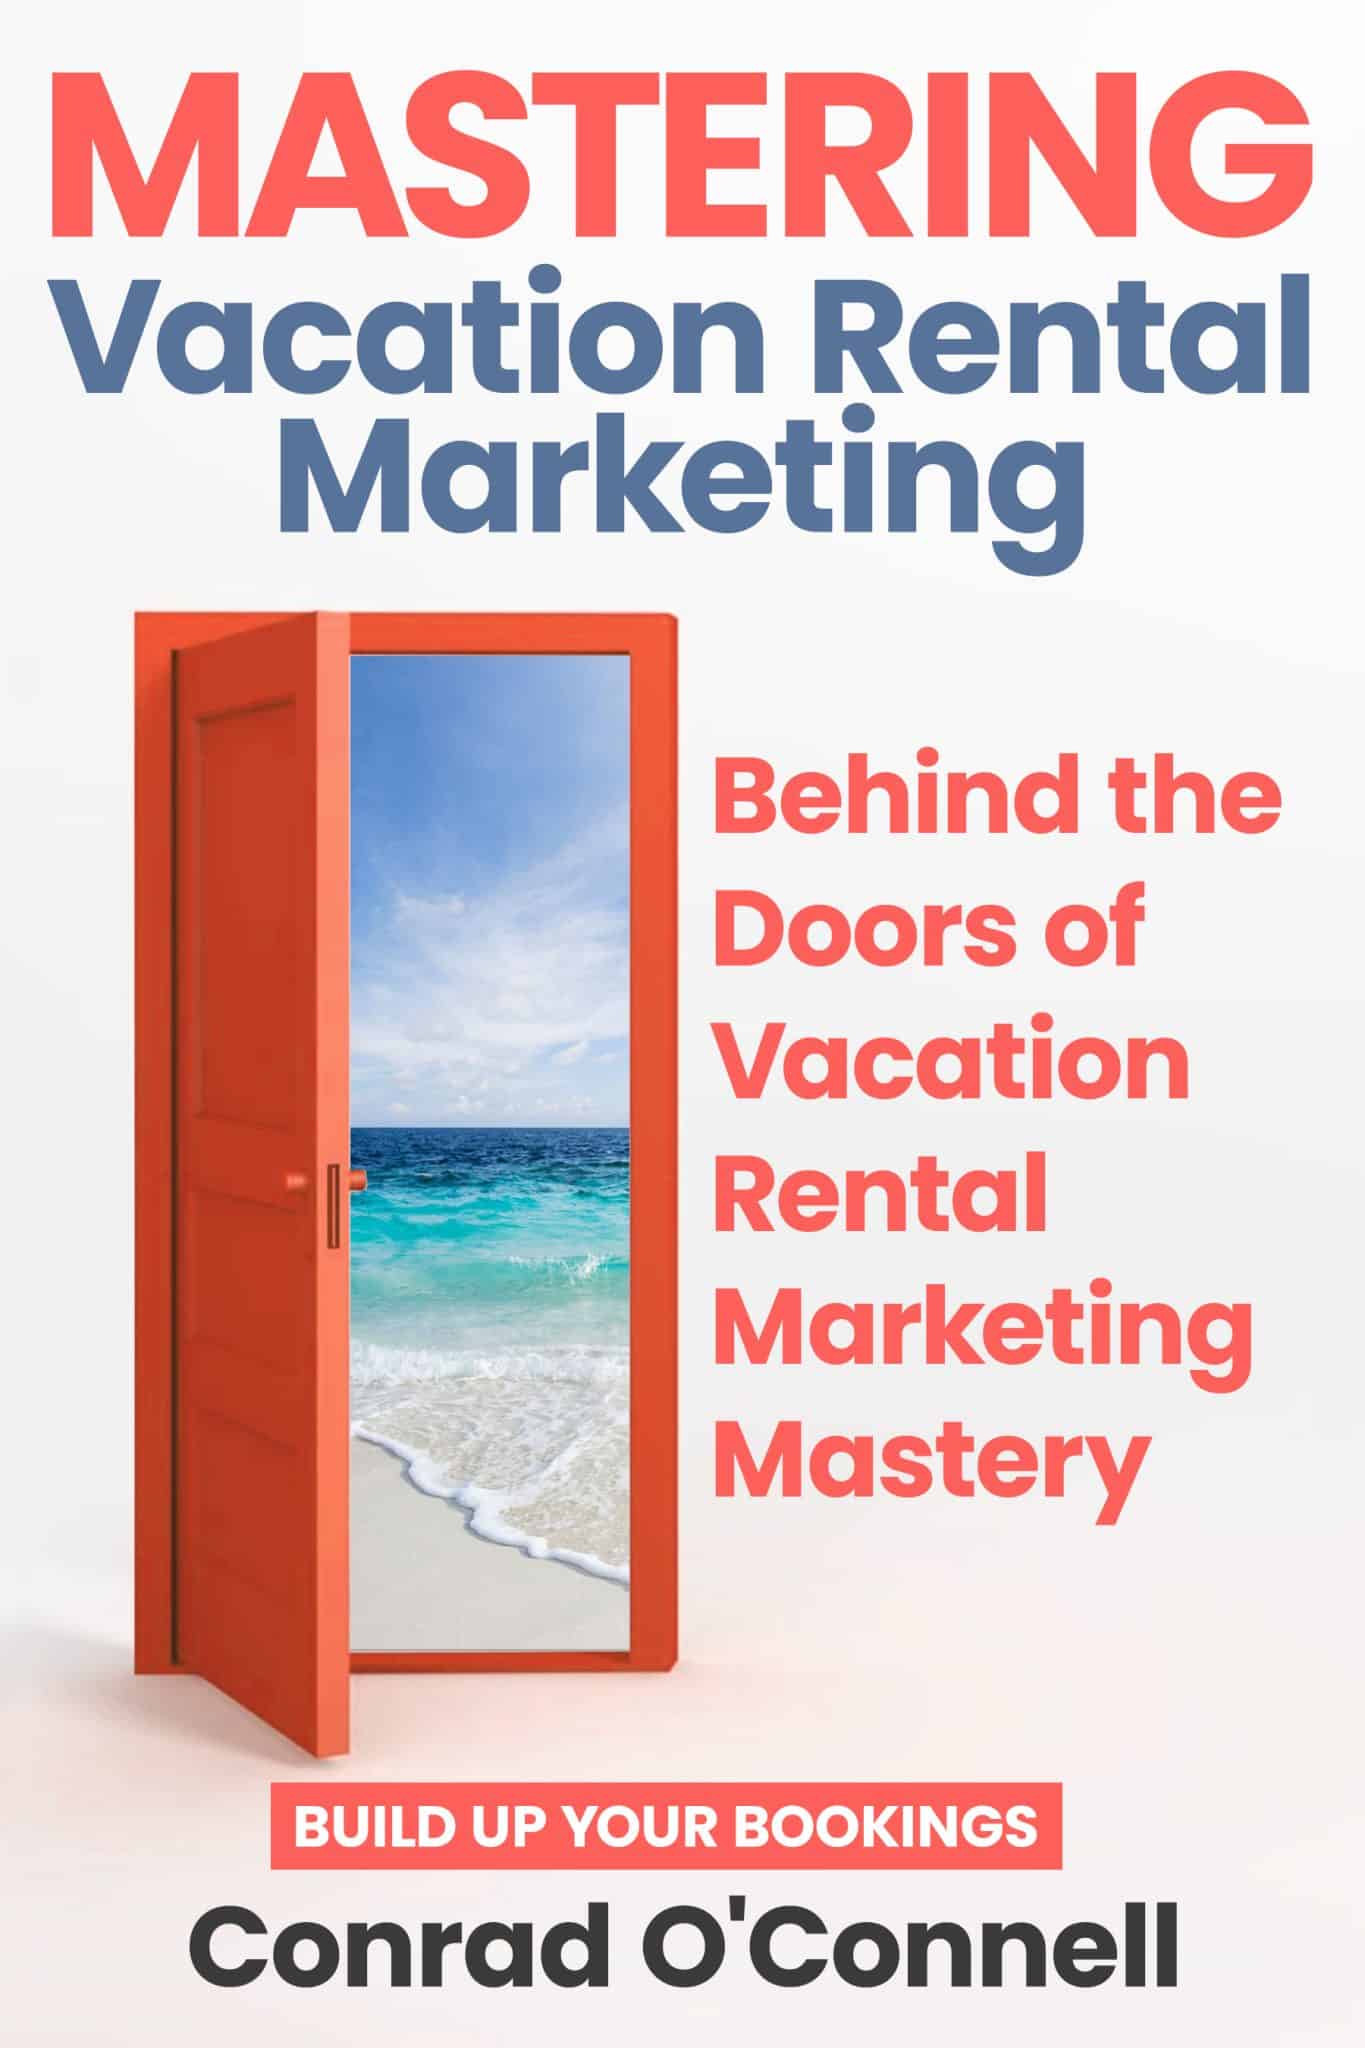 business plan for a vacation rental